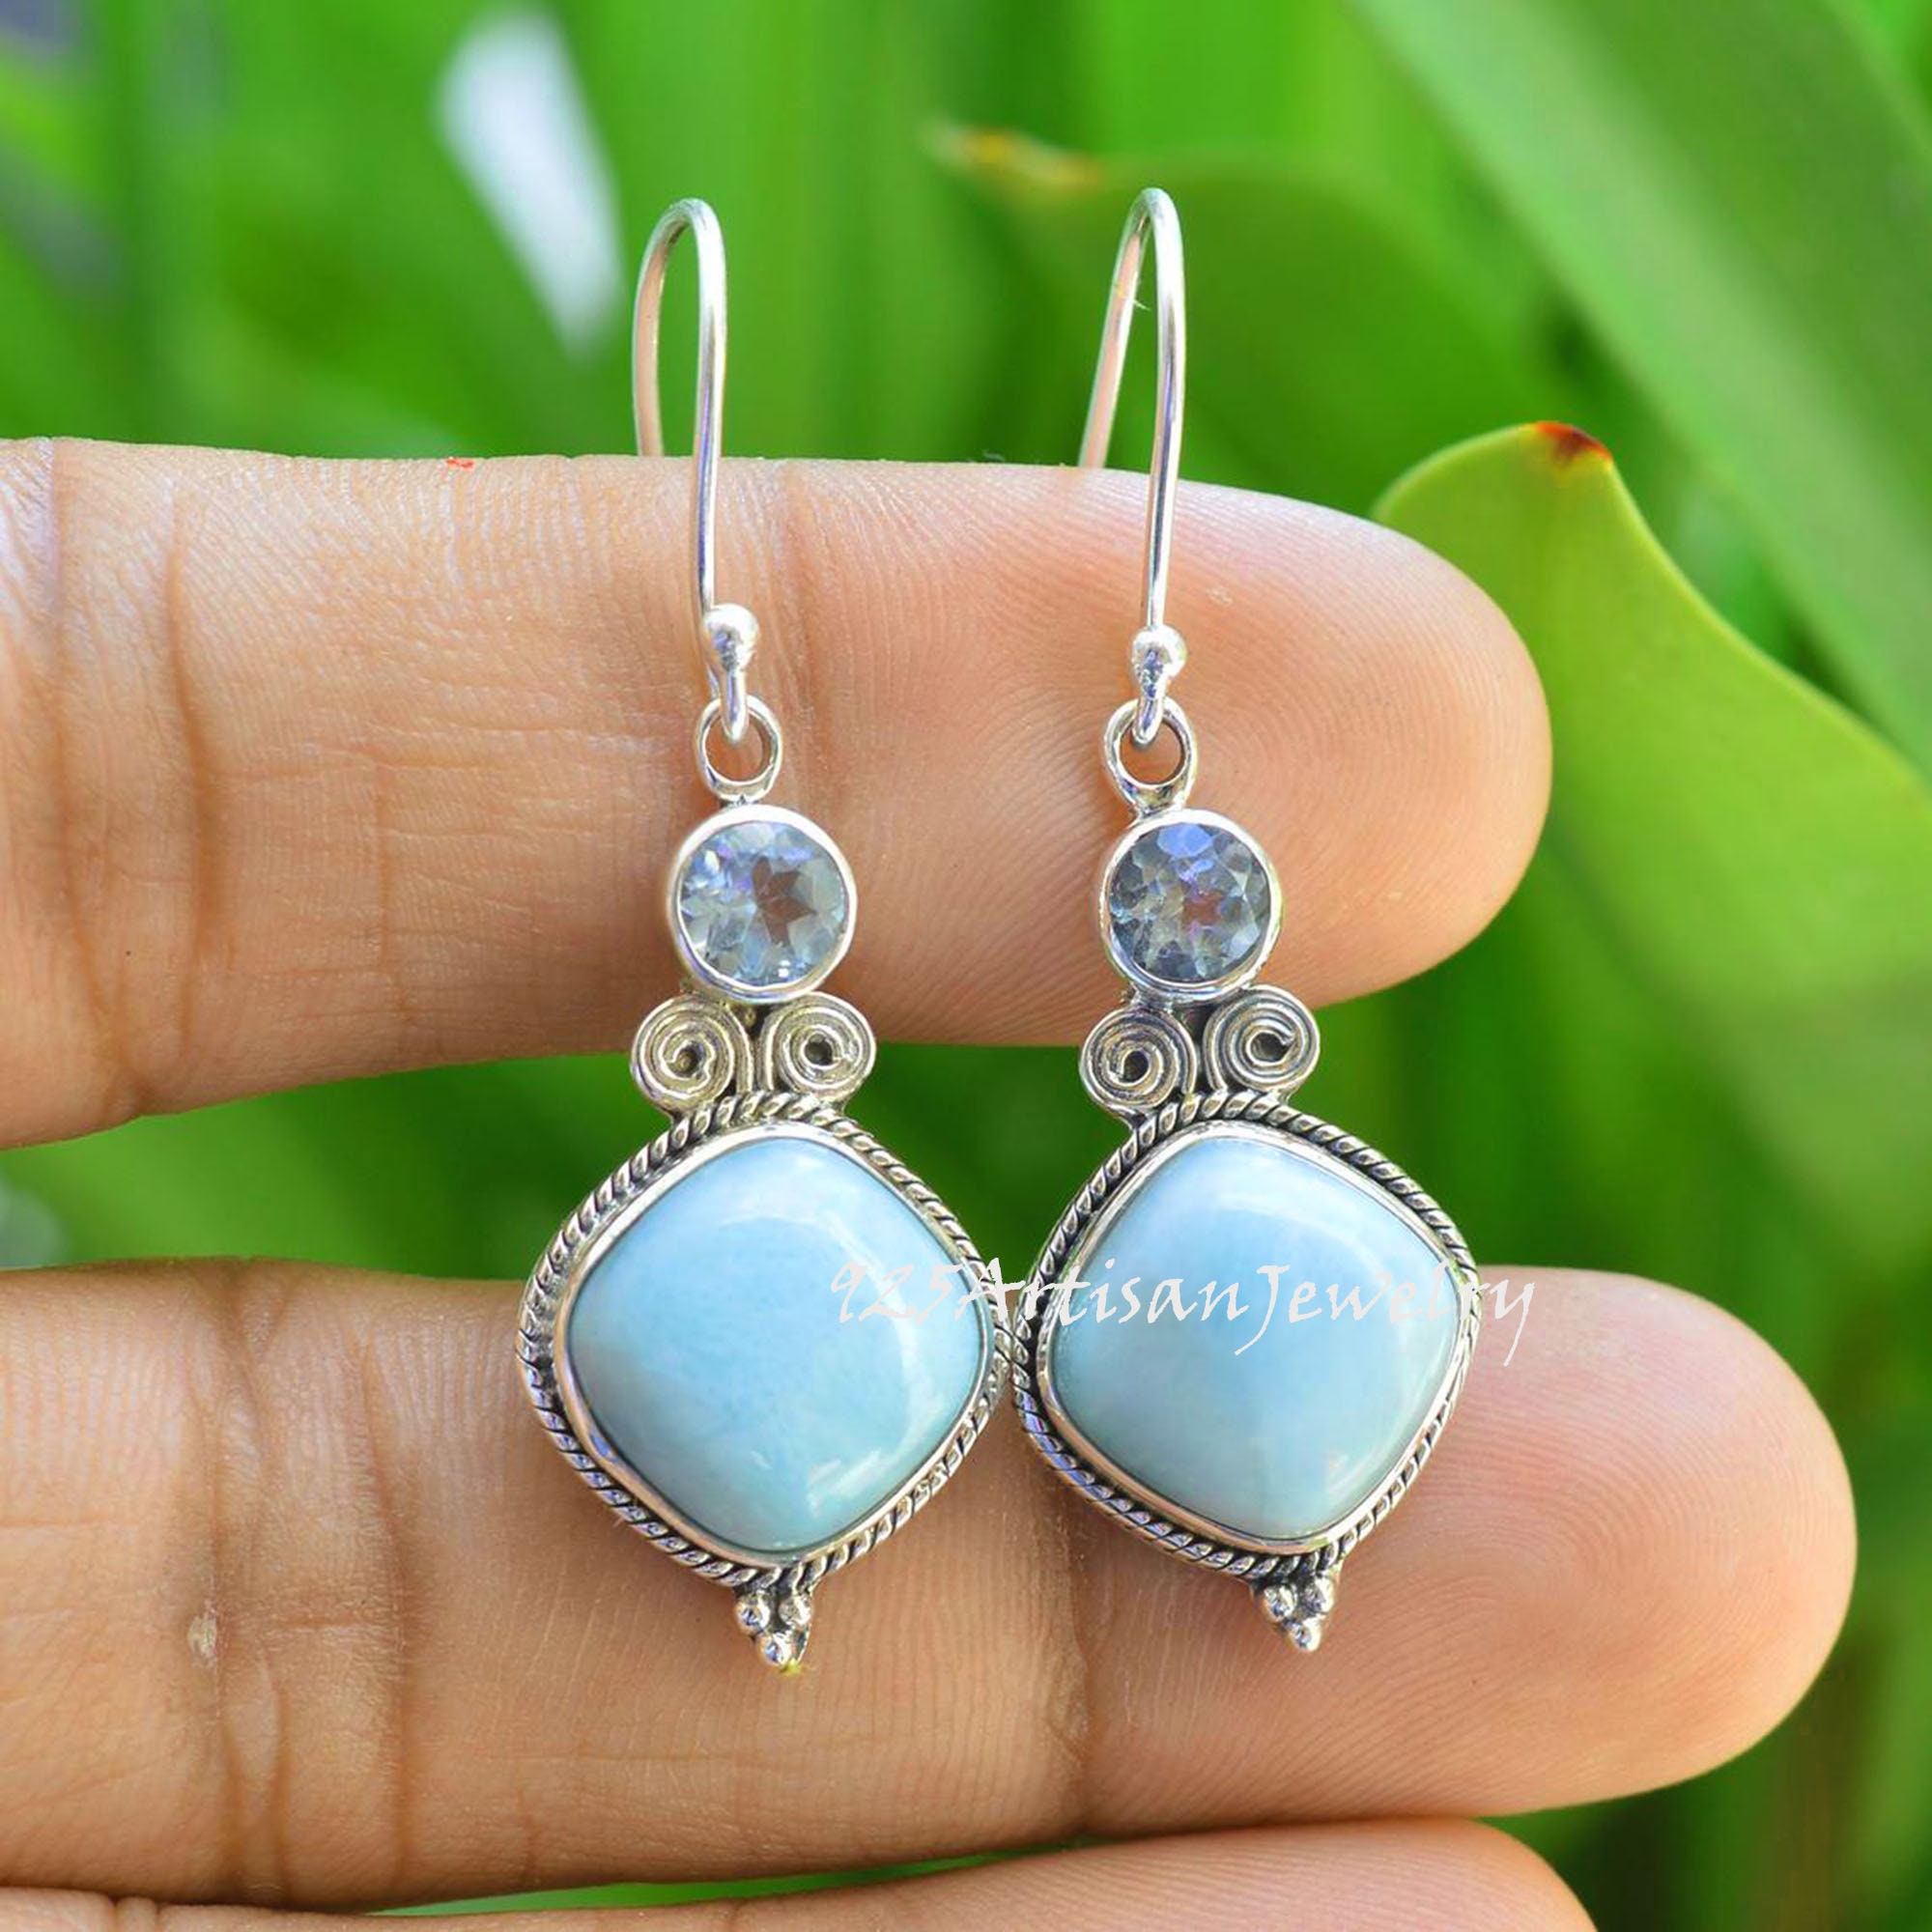 Details about   BALI STYLE-925 Sterling Silver NATURAL LARIMAR Handmade earring Jewelry 